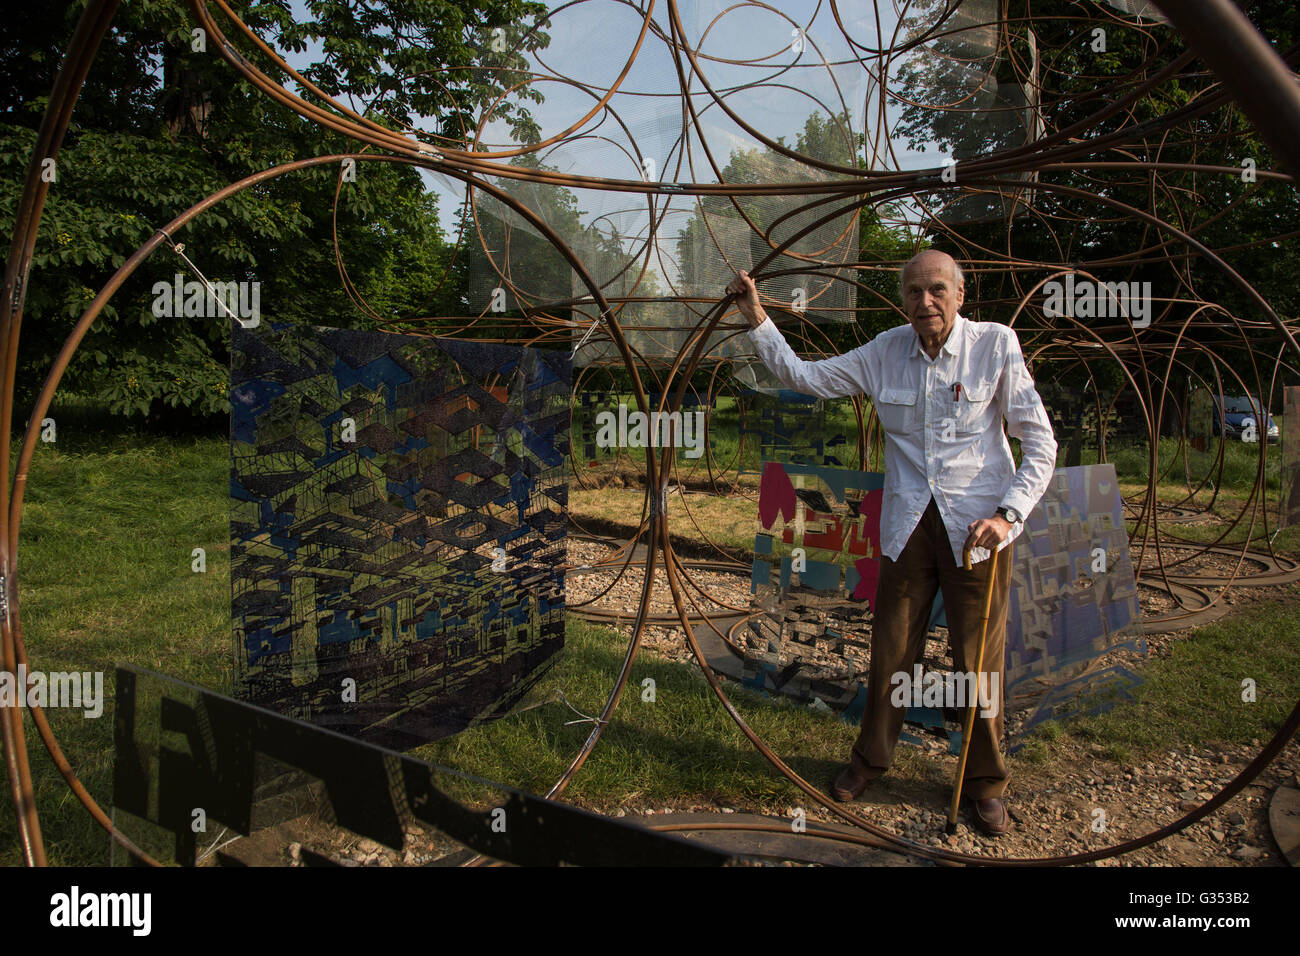 London, UK. 7 June 2016. Designer Yona Friedman with his Summer House. The Serpentine reveals the completed structures for its expanded Architecture Programme for 2016: the 16th annual Pavilion designed by Bjarke Ingels Group (BIG) and four newly commissioned Summer Houses by Kunle Adeyemi (NLE), Barkow Leibinger, Yona Friedman and Asif Khan. The pavilion and summer houses are free to view from 10 June to 9 October 2016. Stock Photo